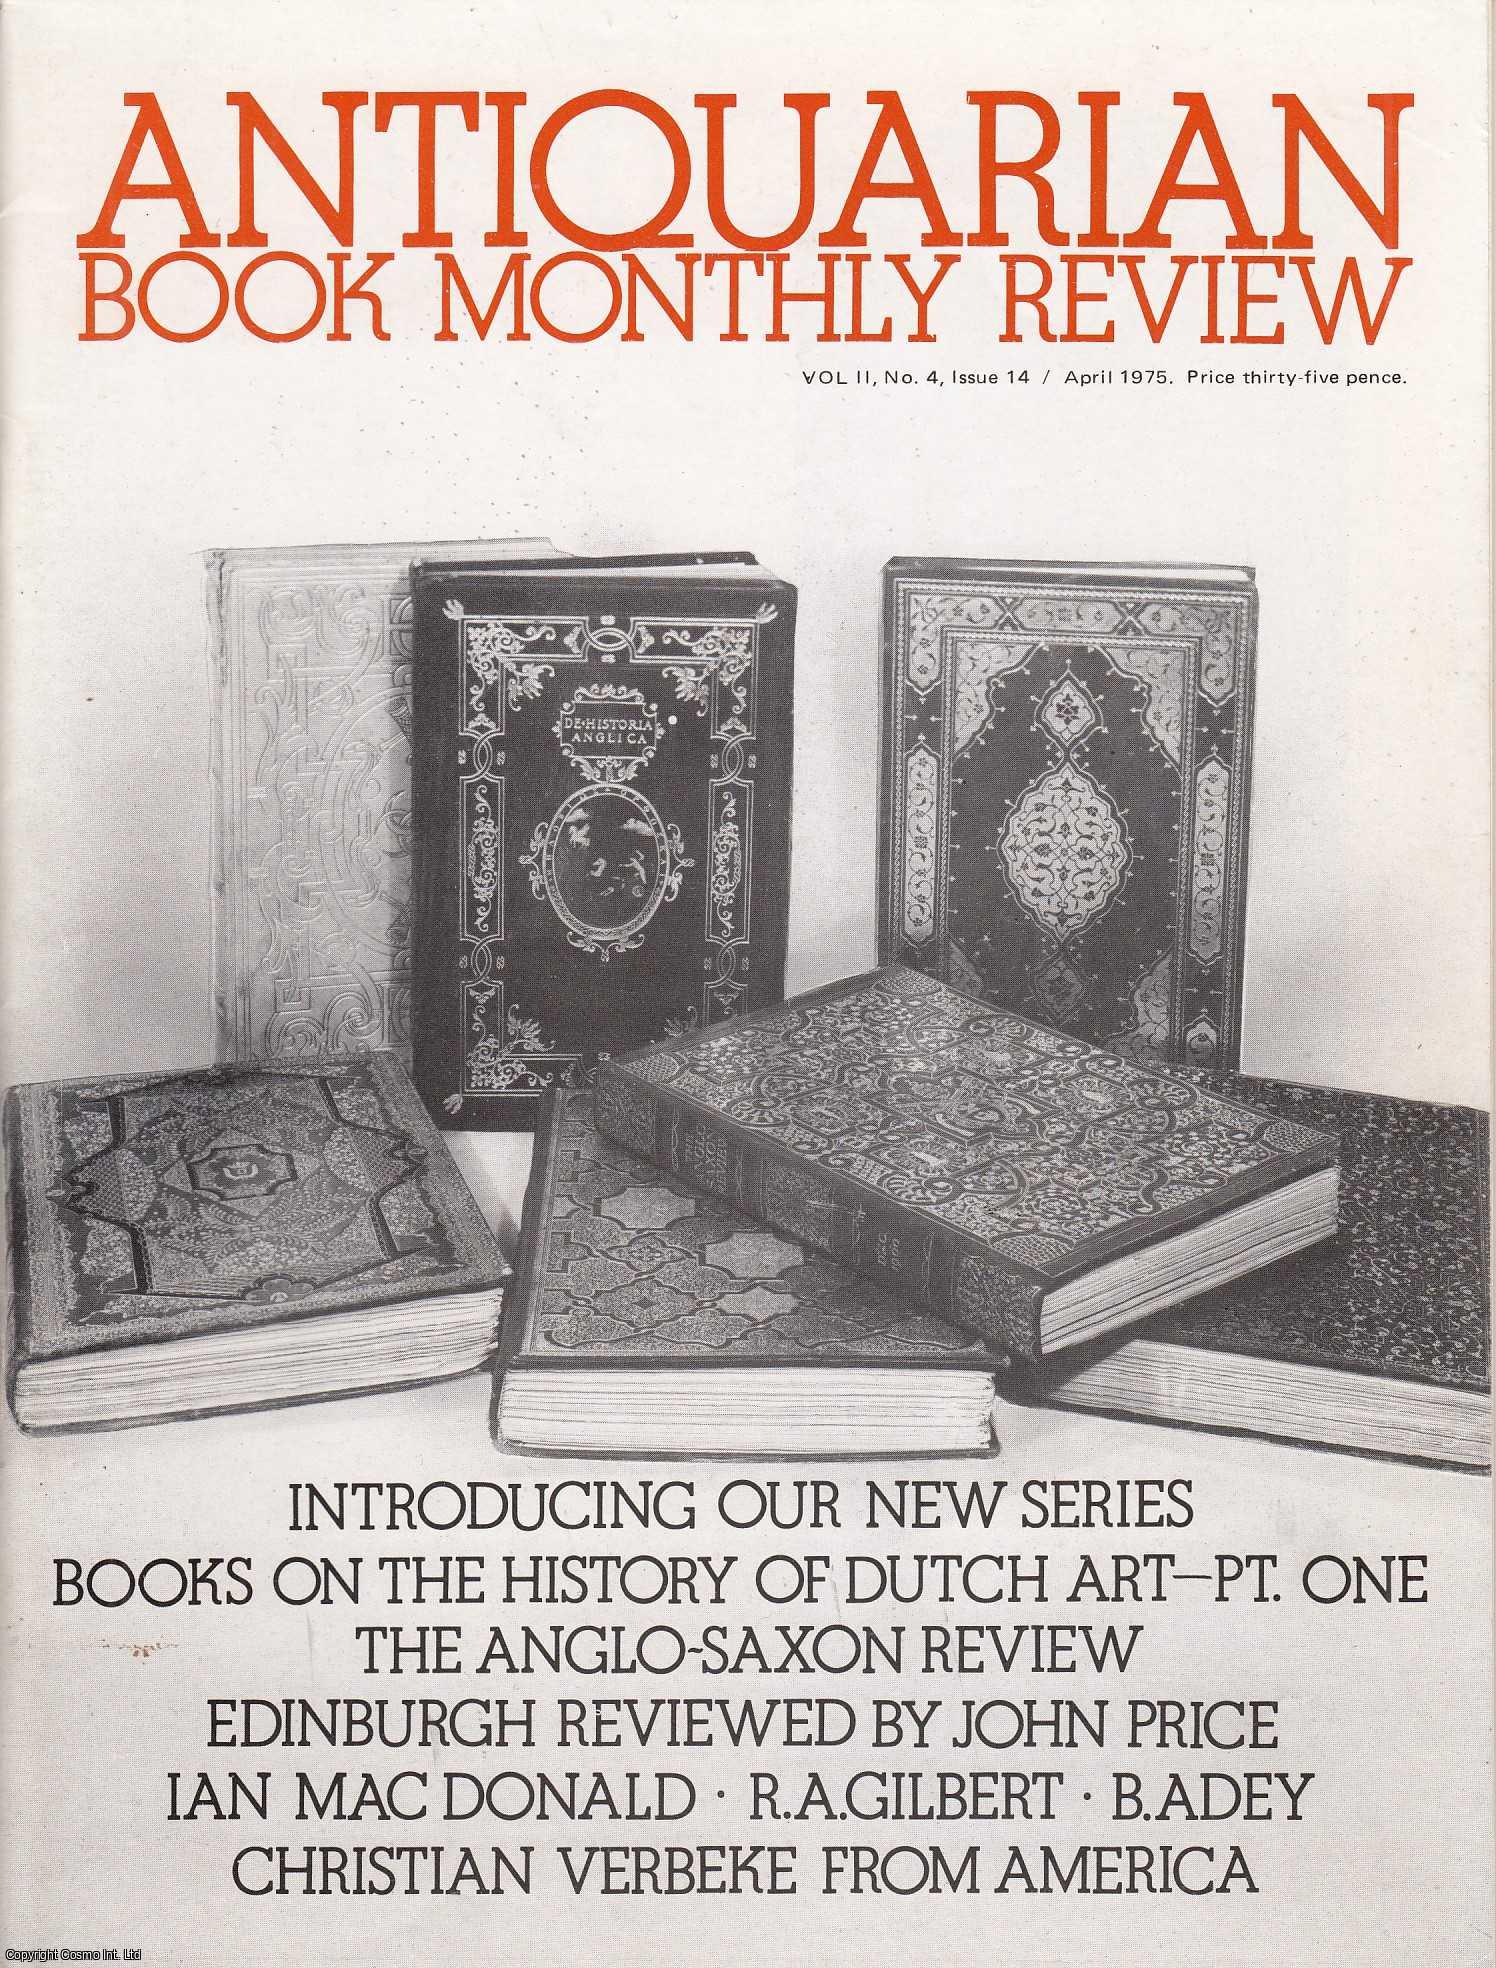 Walter A. Liedtke - Antiquarian and out of print books on the History of Dutch Art. Part 1 (of 2). An original article contained in a complete monthly issue of the Antiquarian Book Monthly Review (ABMR), 1975.